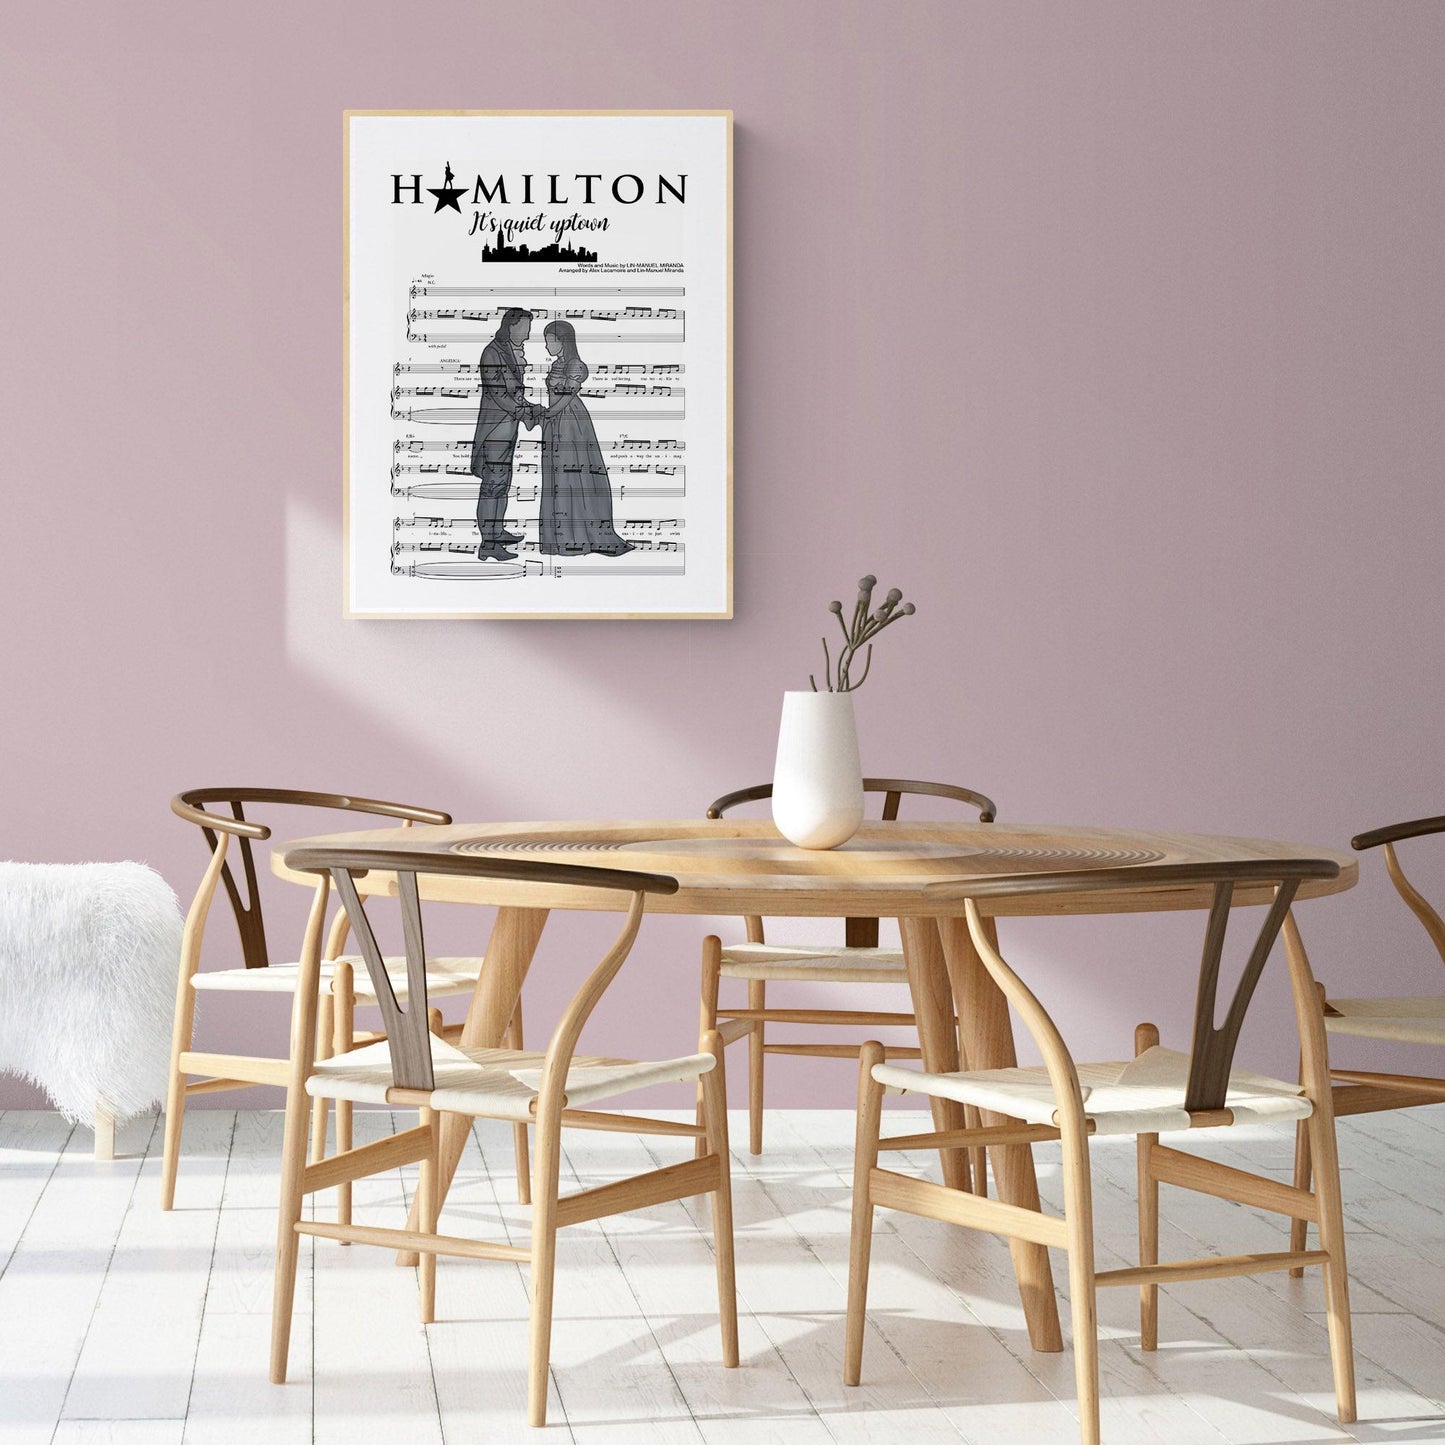 Bring home the nostalgia of the Hamilton Musical with this IT'S QUIET UPTOWN Poster. Perfect for any fan of the hit Broadway show, this stunning poster was designed and sold exclusively by 98Types Music. Hang it on your bedroom wall and re-live your favorite moments from the production. This poster provides a unique way to remember the show and its various characters for years to come. 